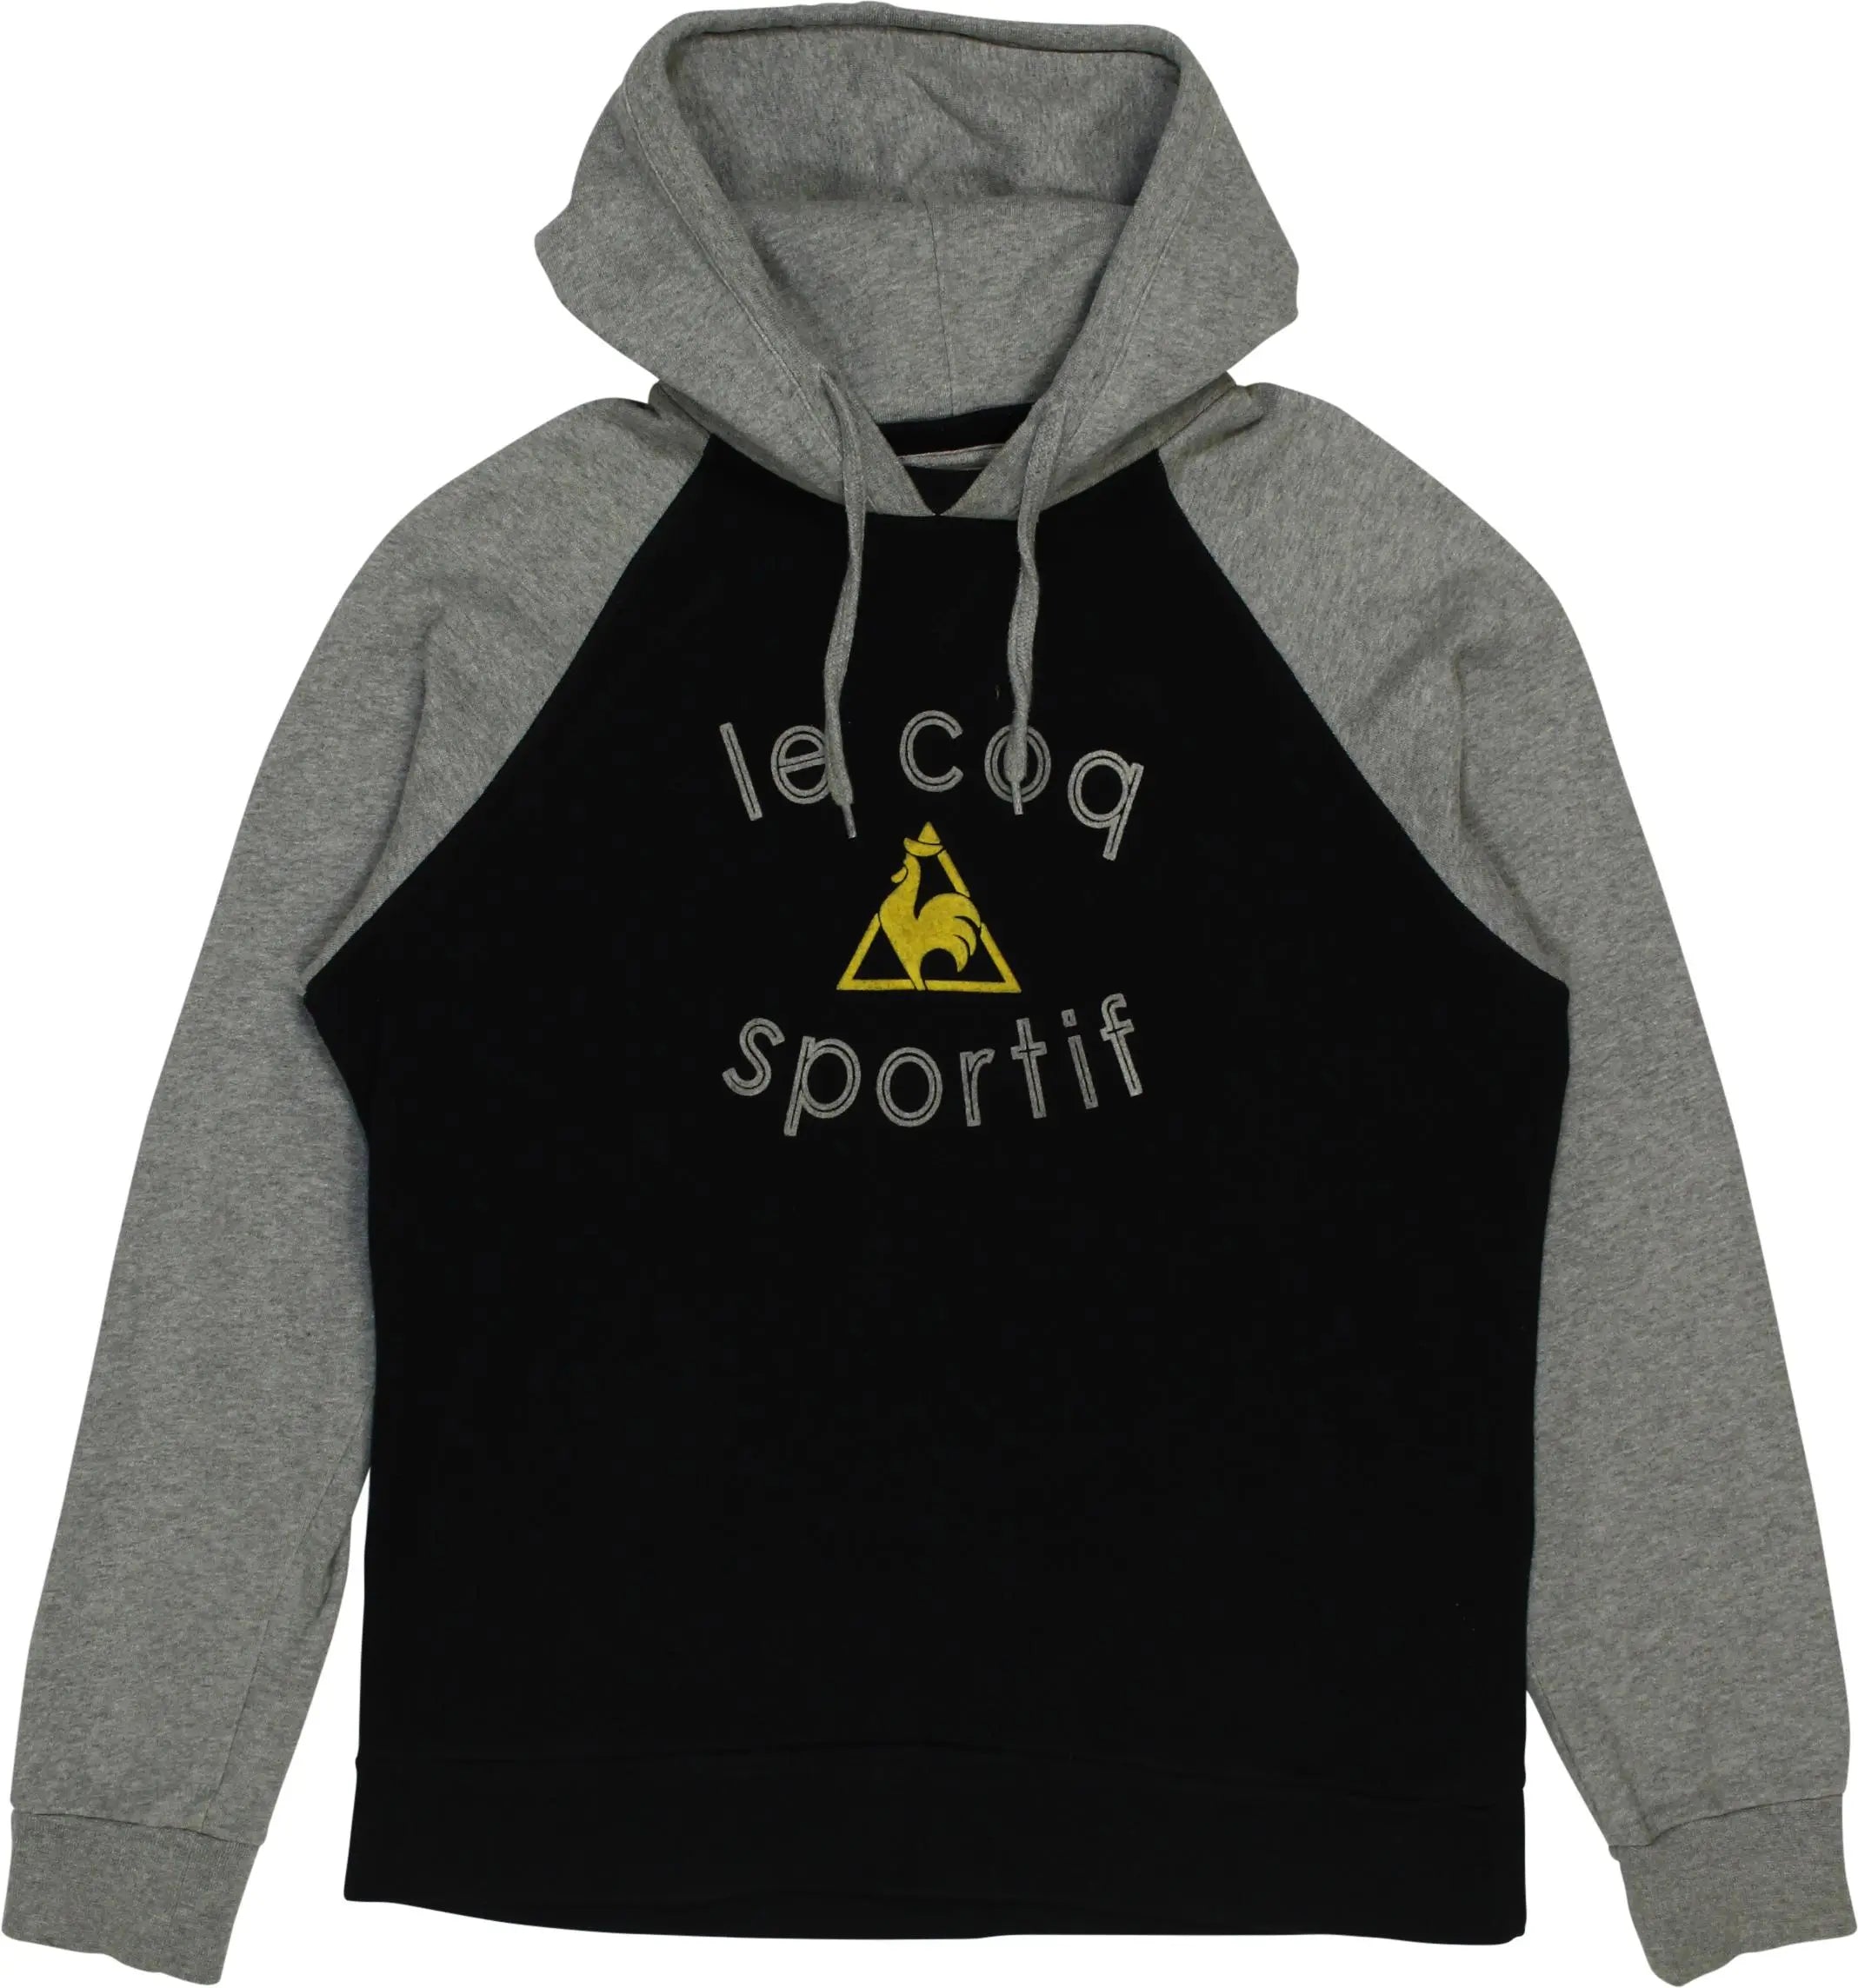 Le Coq Sportif - Black Hoodie by Le Coq Sportif- ThriftTale.com - Vintage and second handclothing